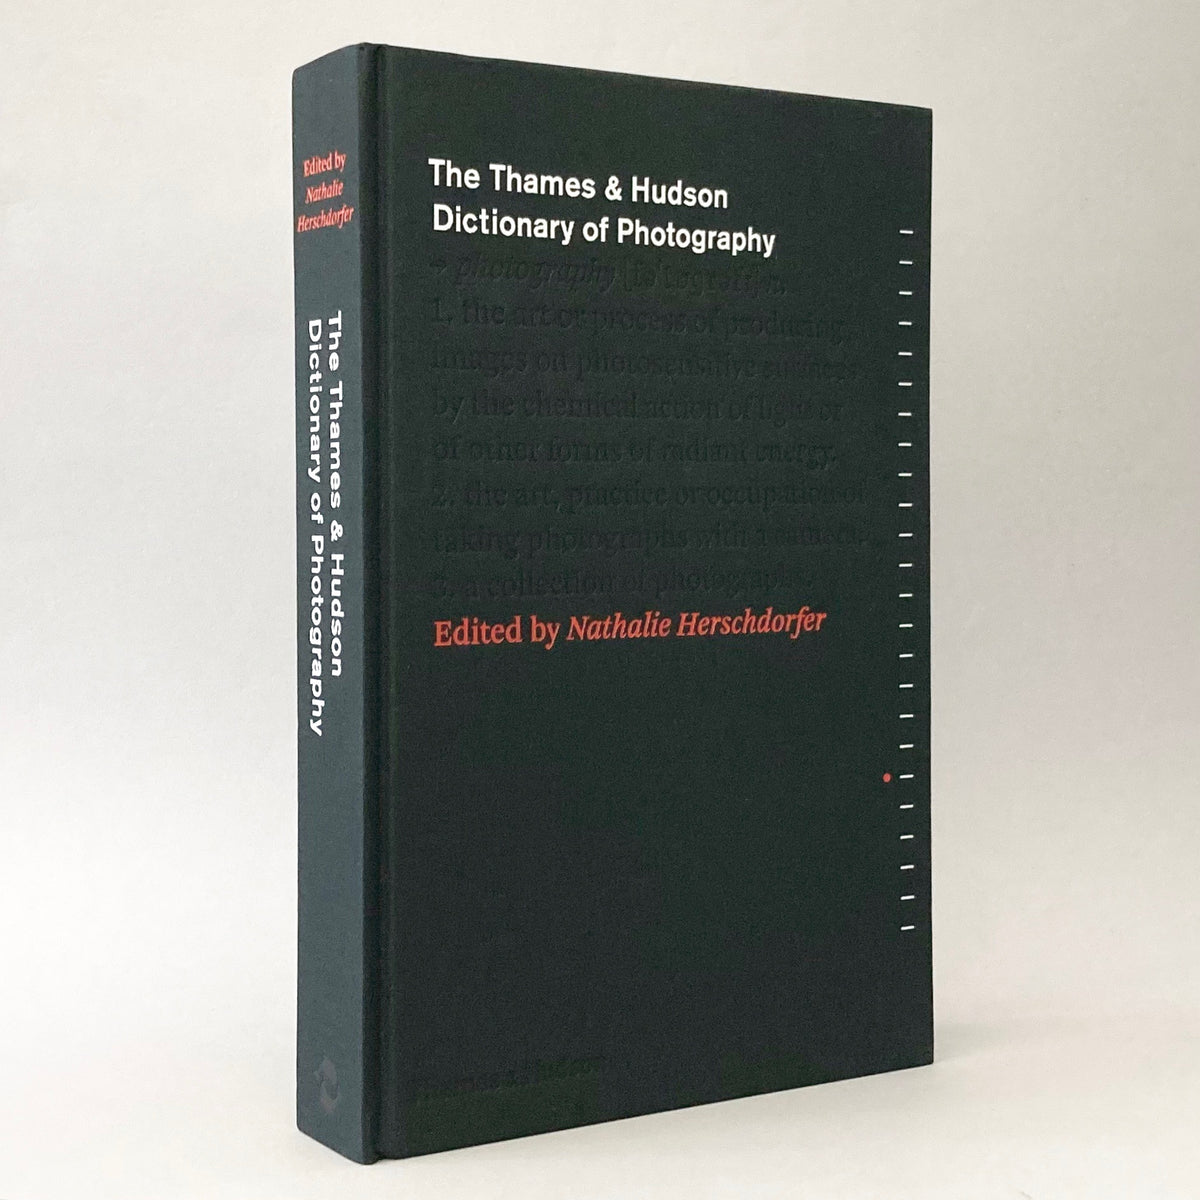 The Thames & Hudson Dictionary of Photography (Paperback) /anglais